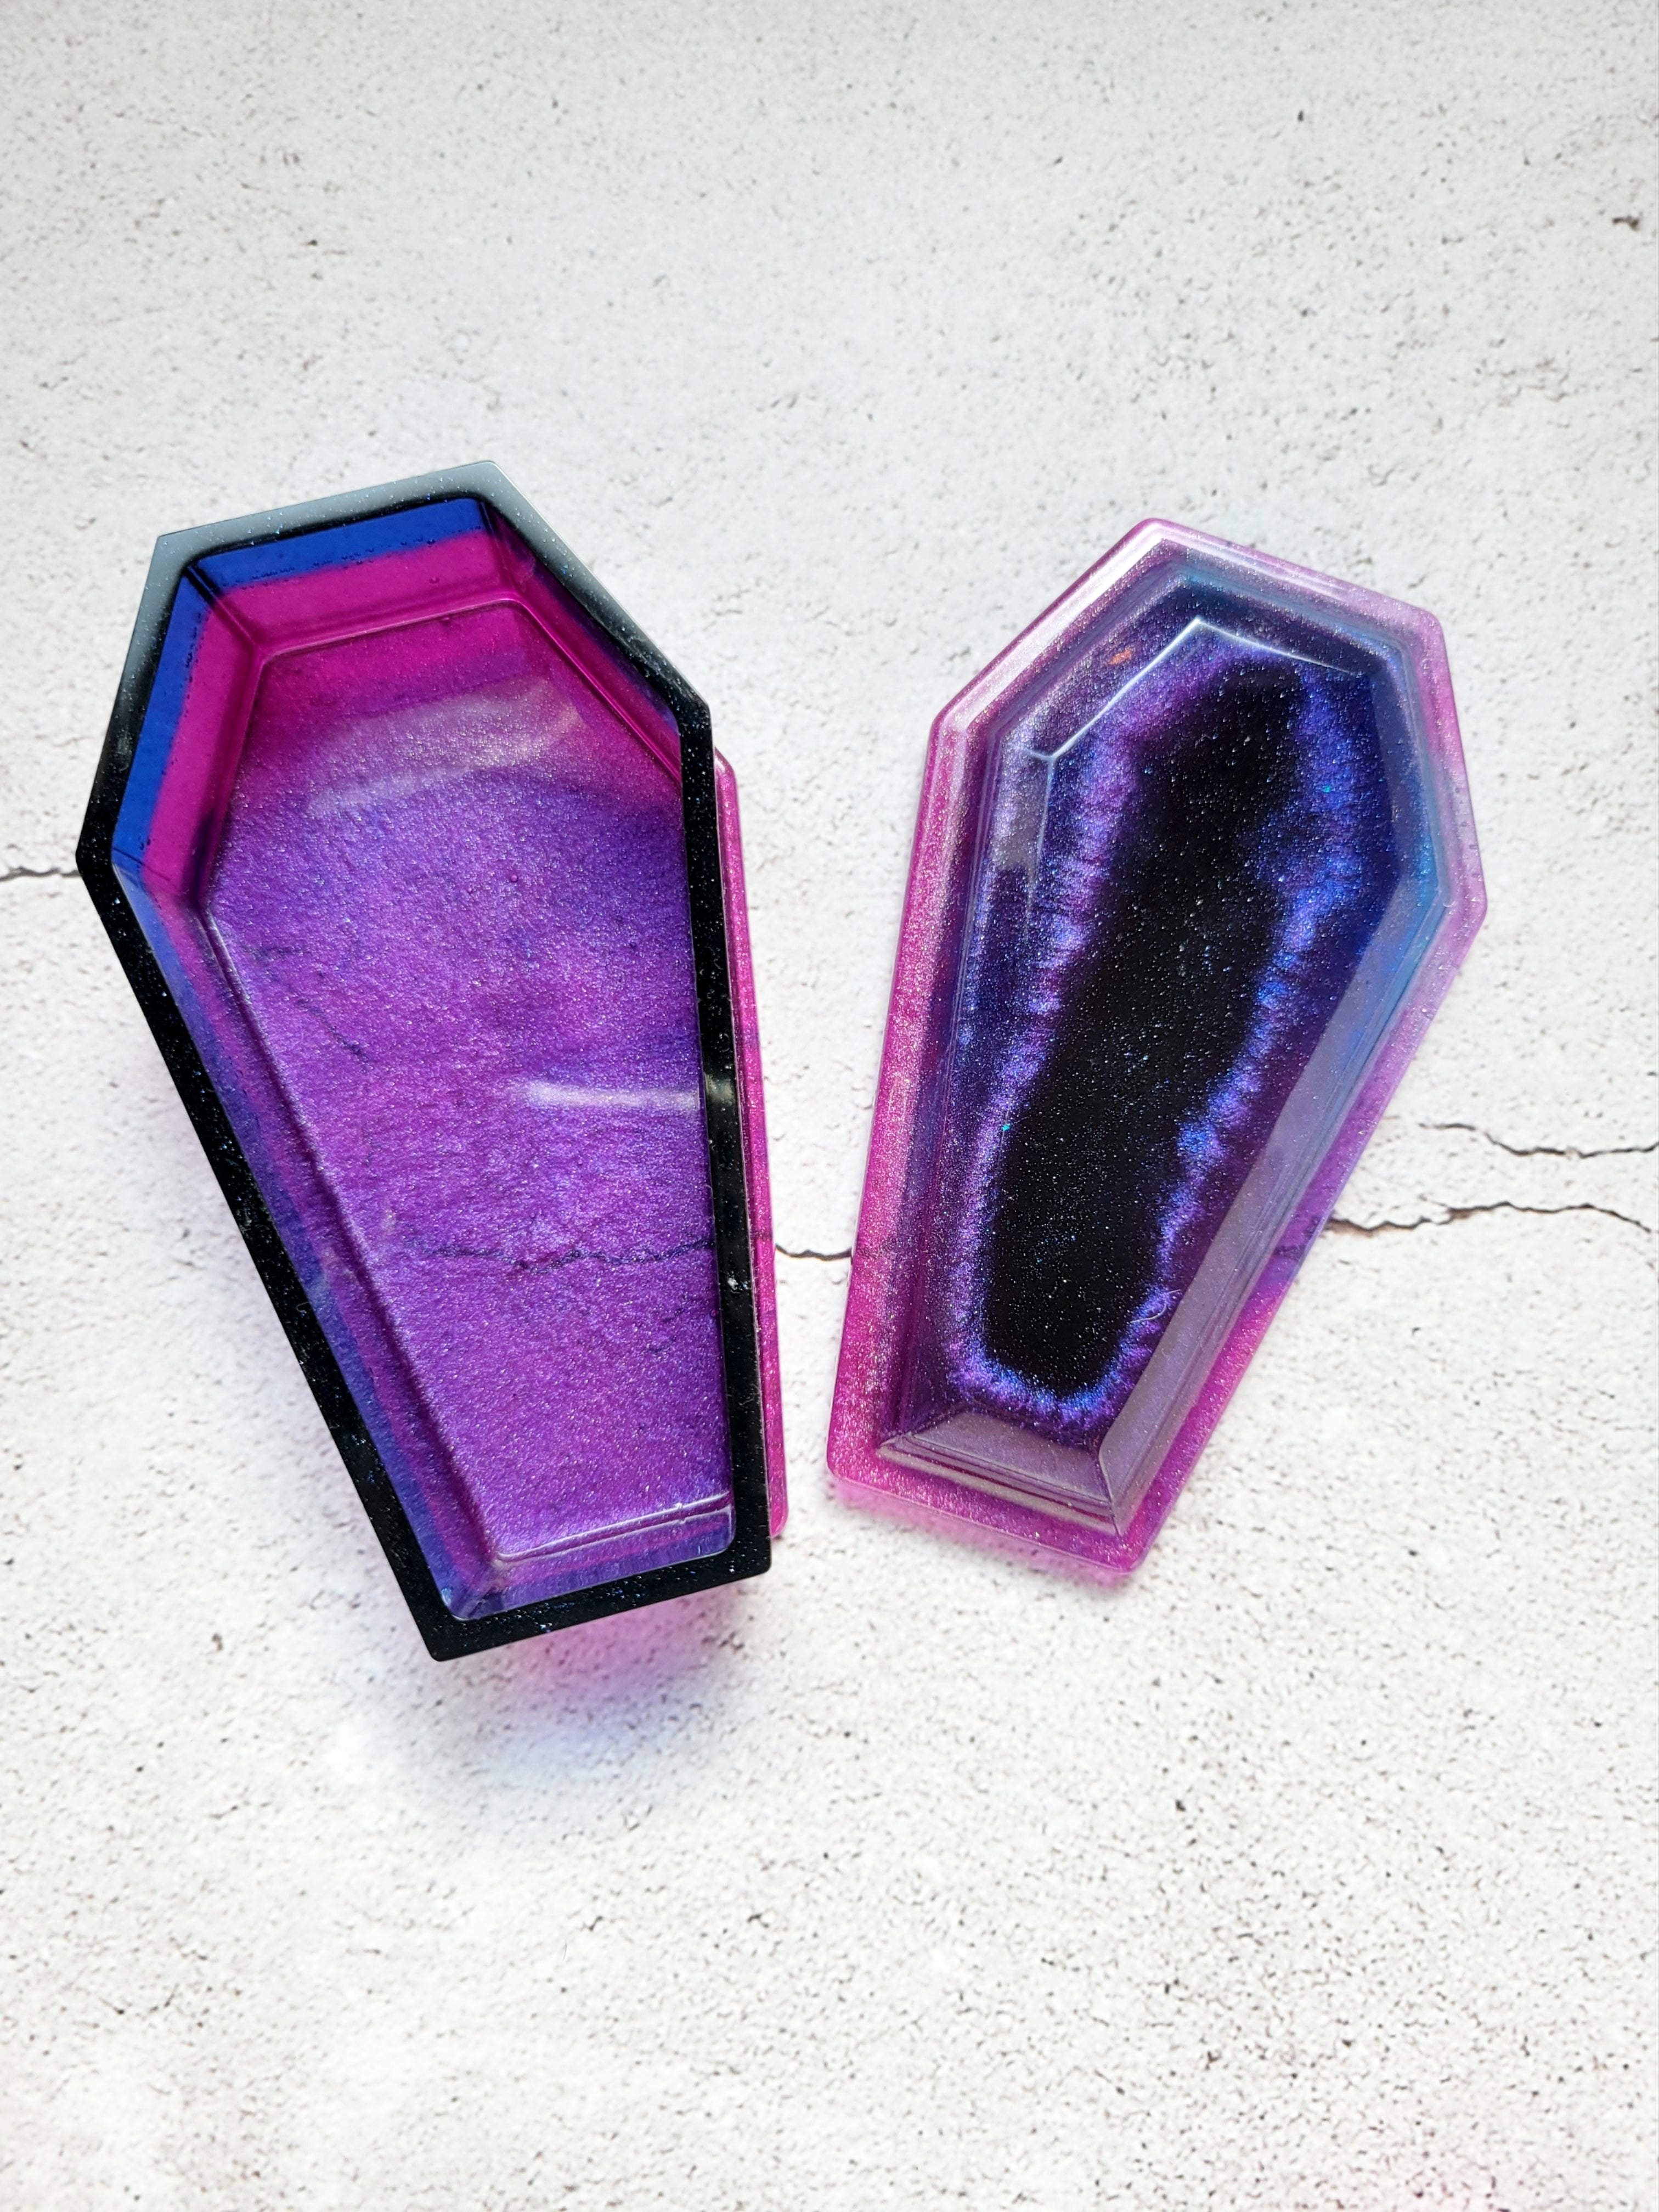 a resin made dice coffin, open lid, in shimmering blues, purples, pinks, and black - no dice in this image